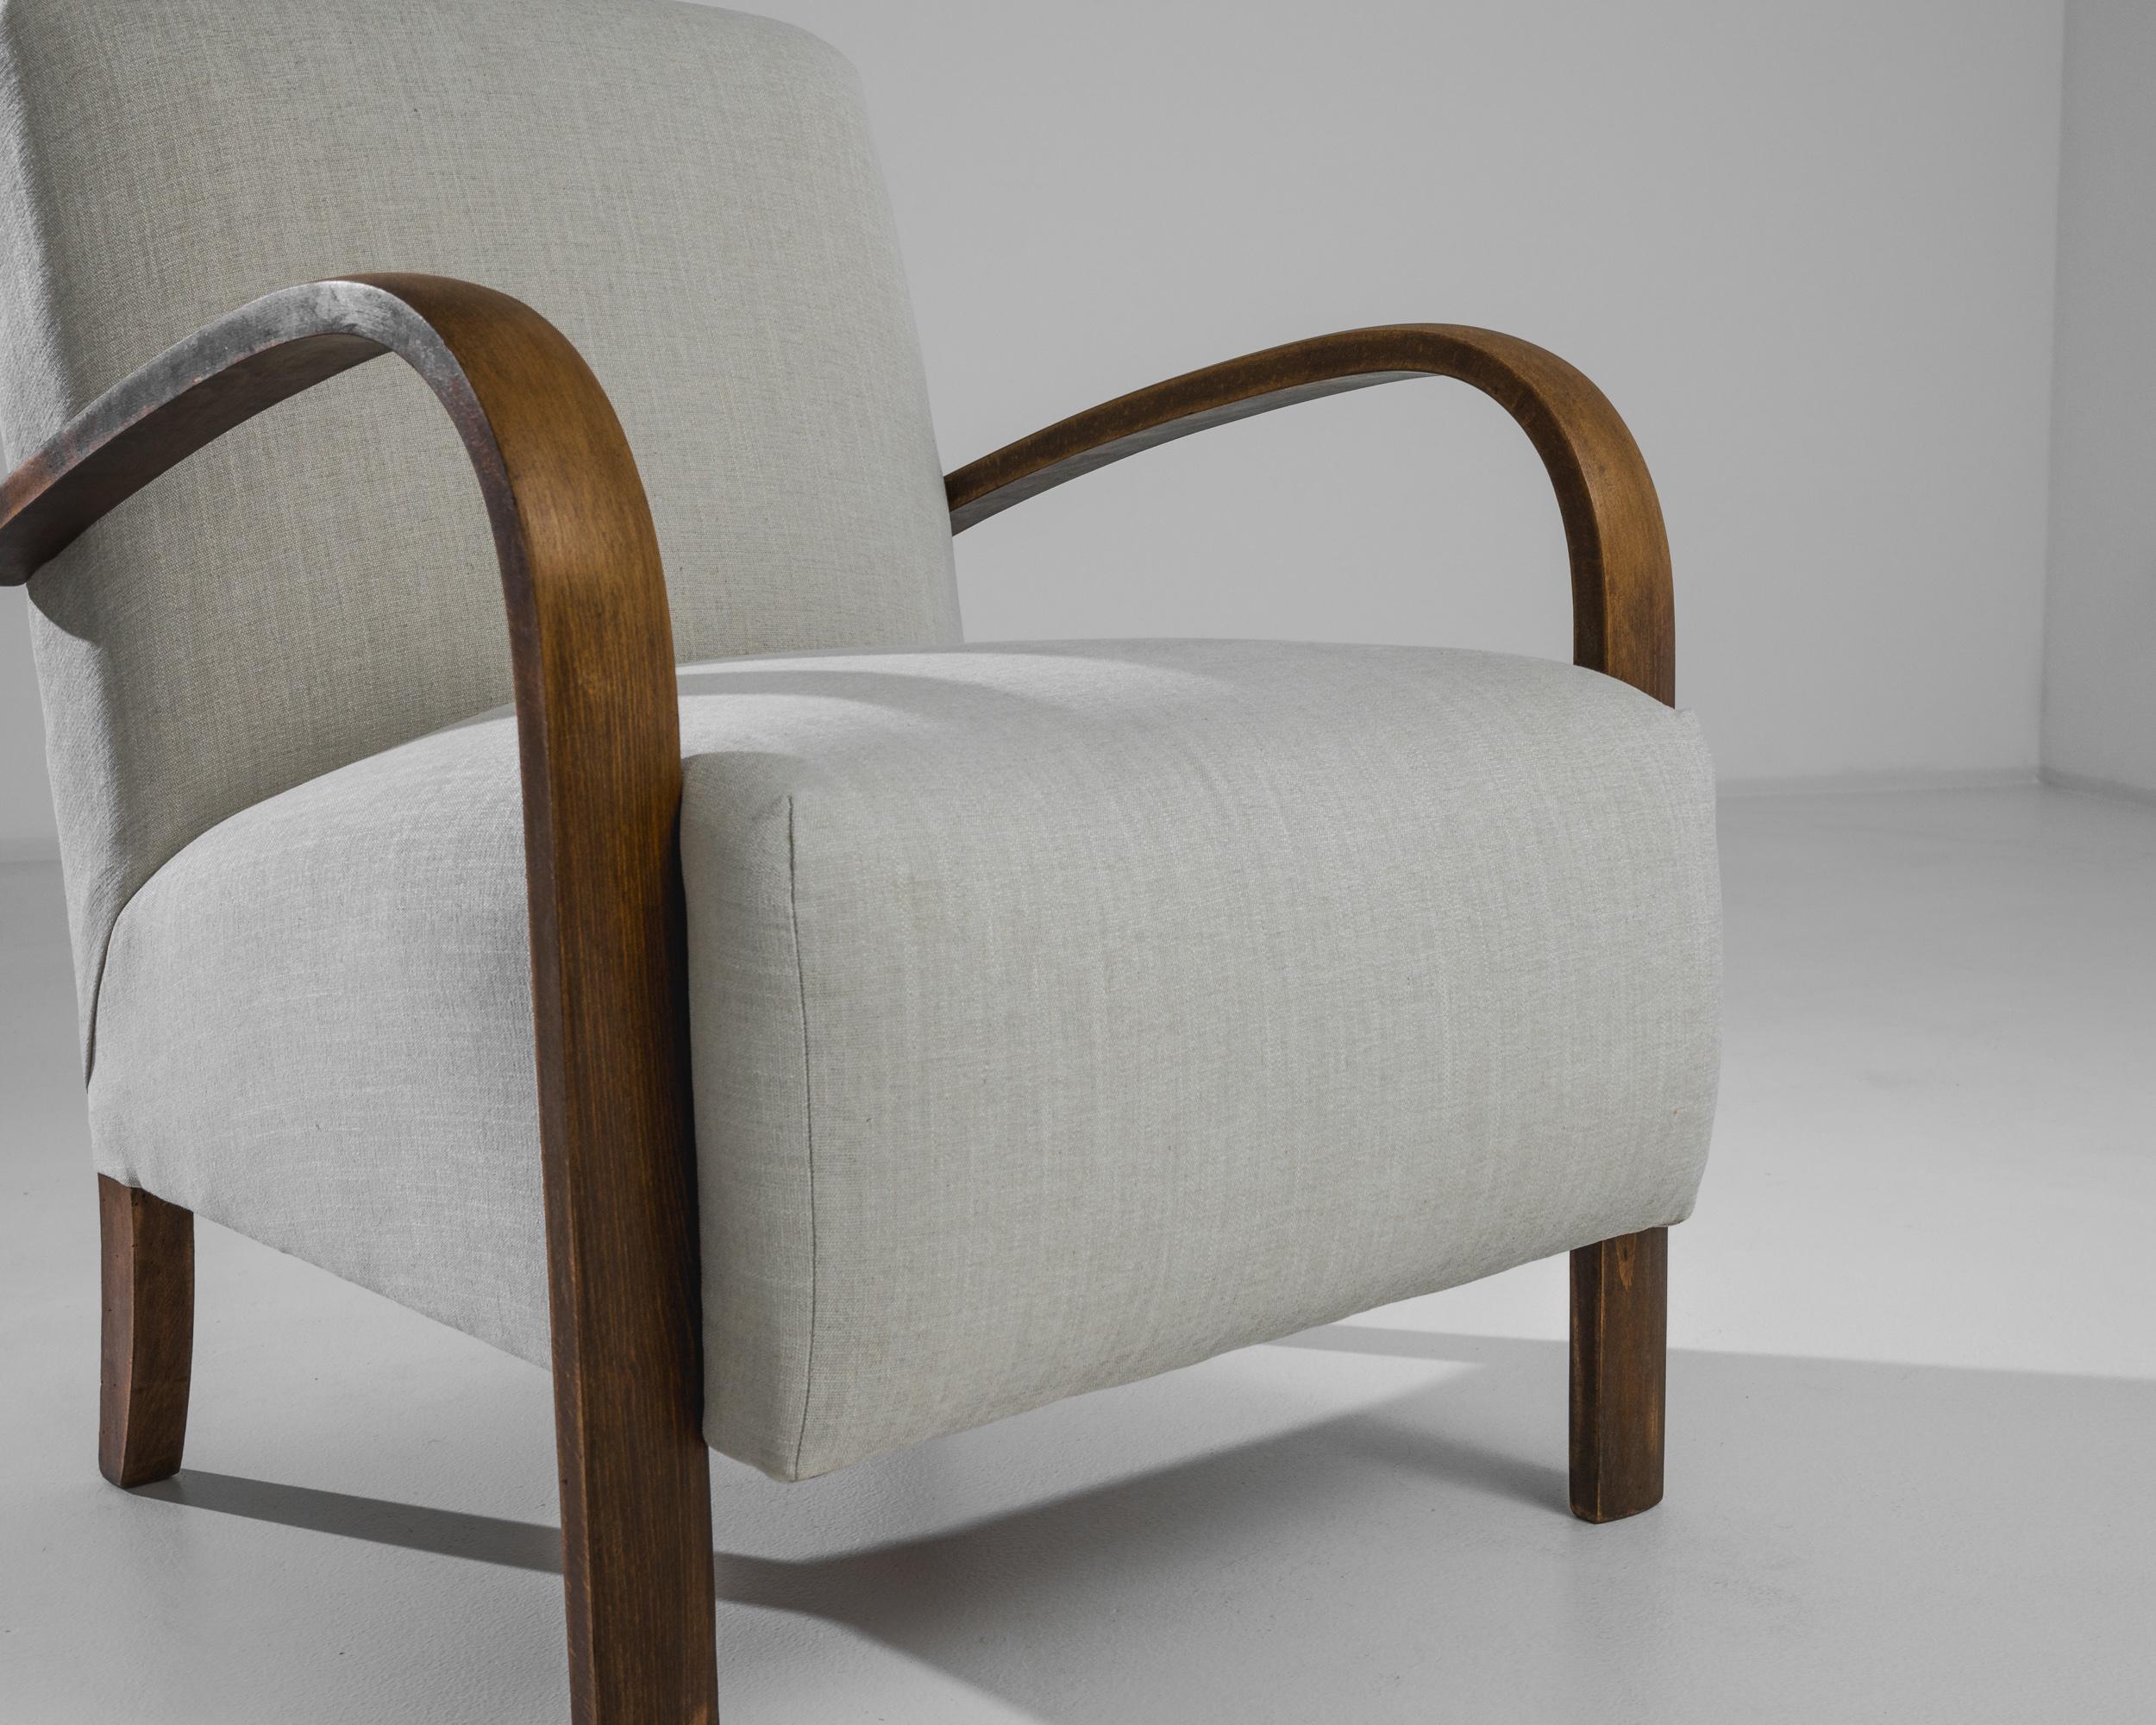 Mid-20th Century 1960s Czech H-213 Bentwood Armchair For Sale